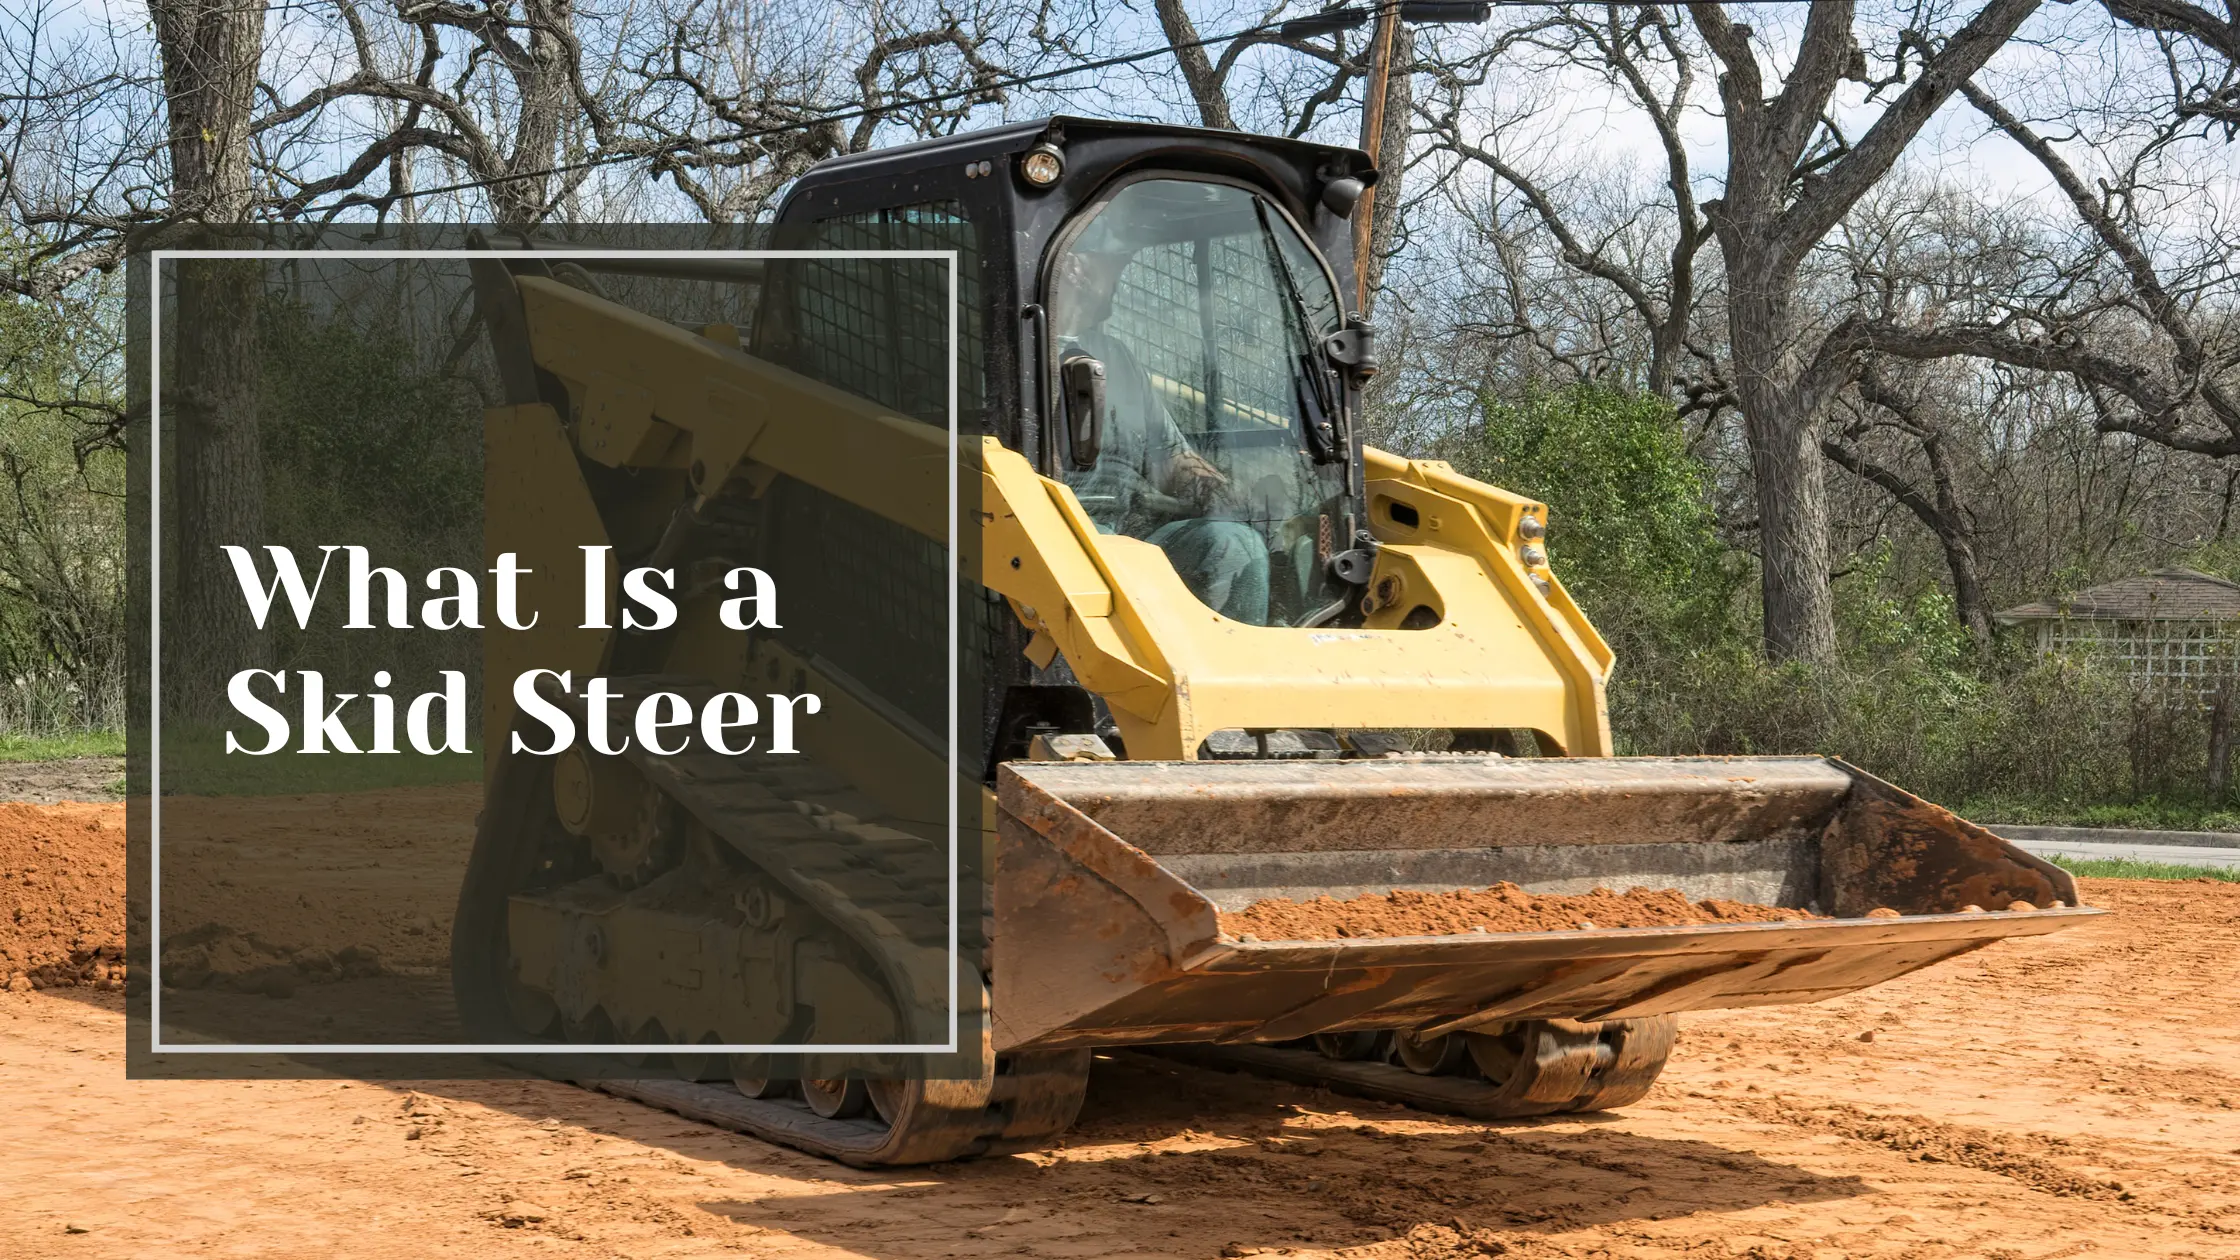 What Is a Skid Steer